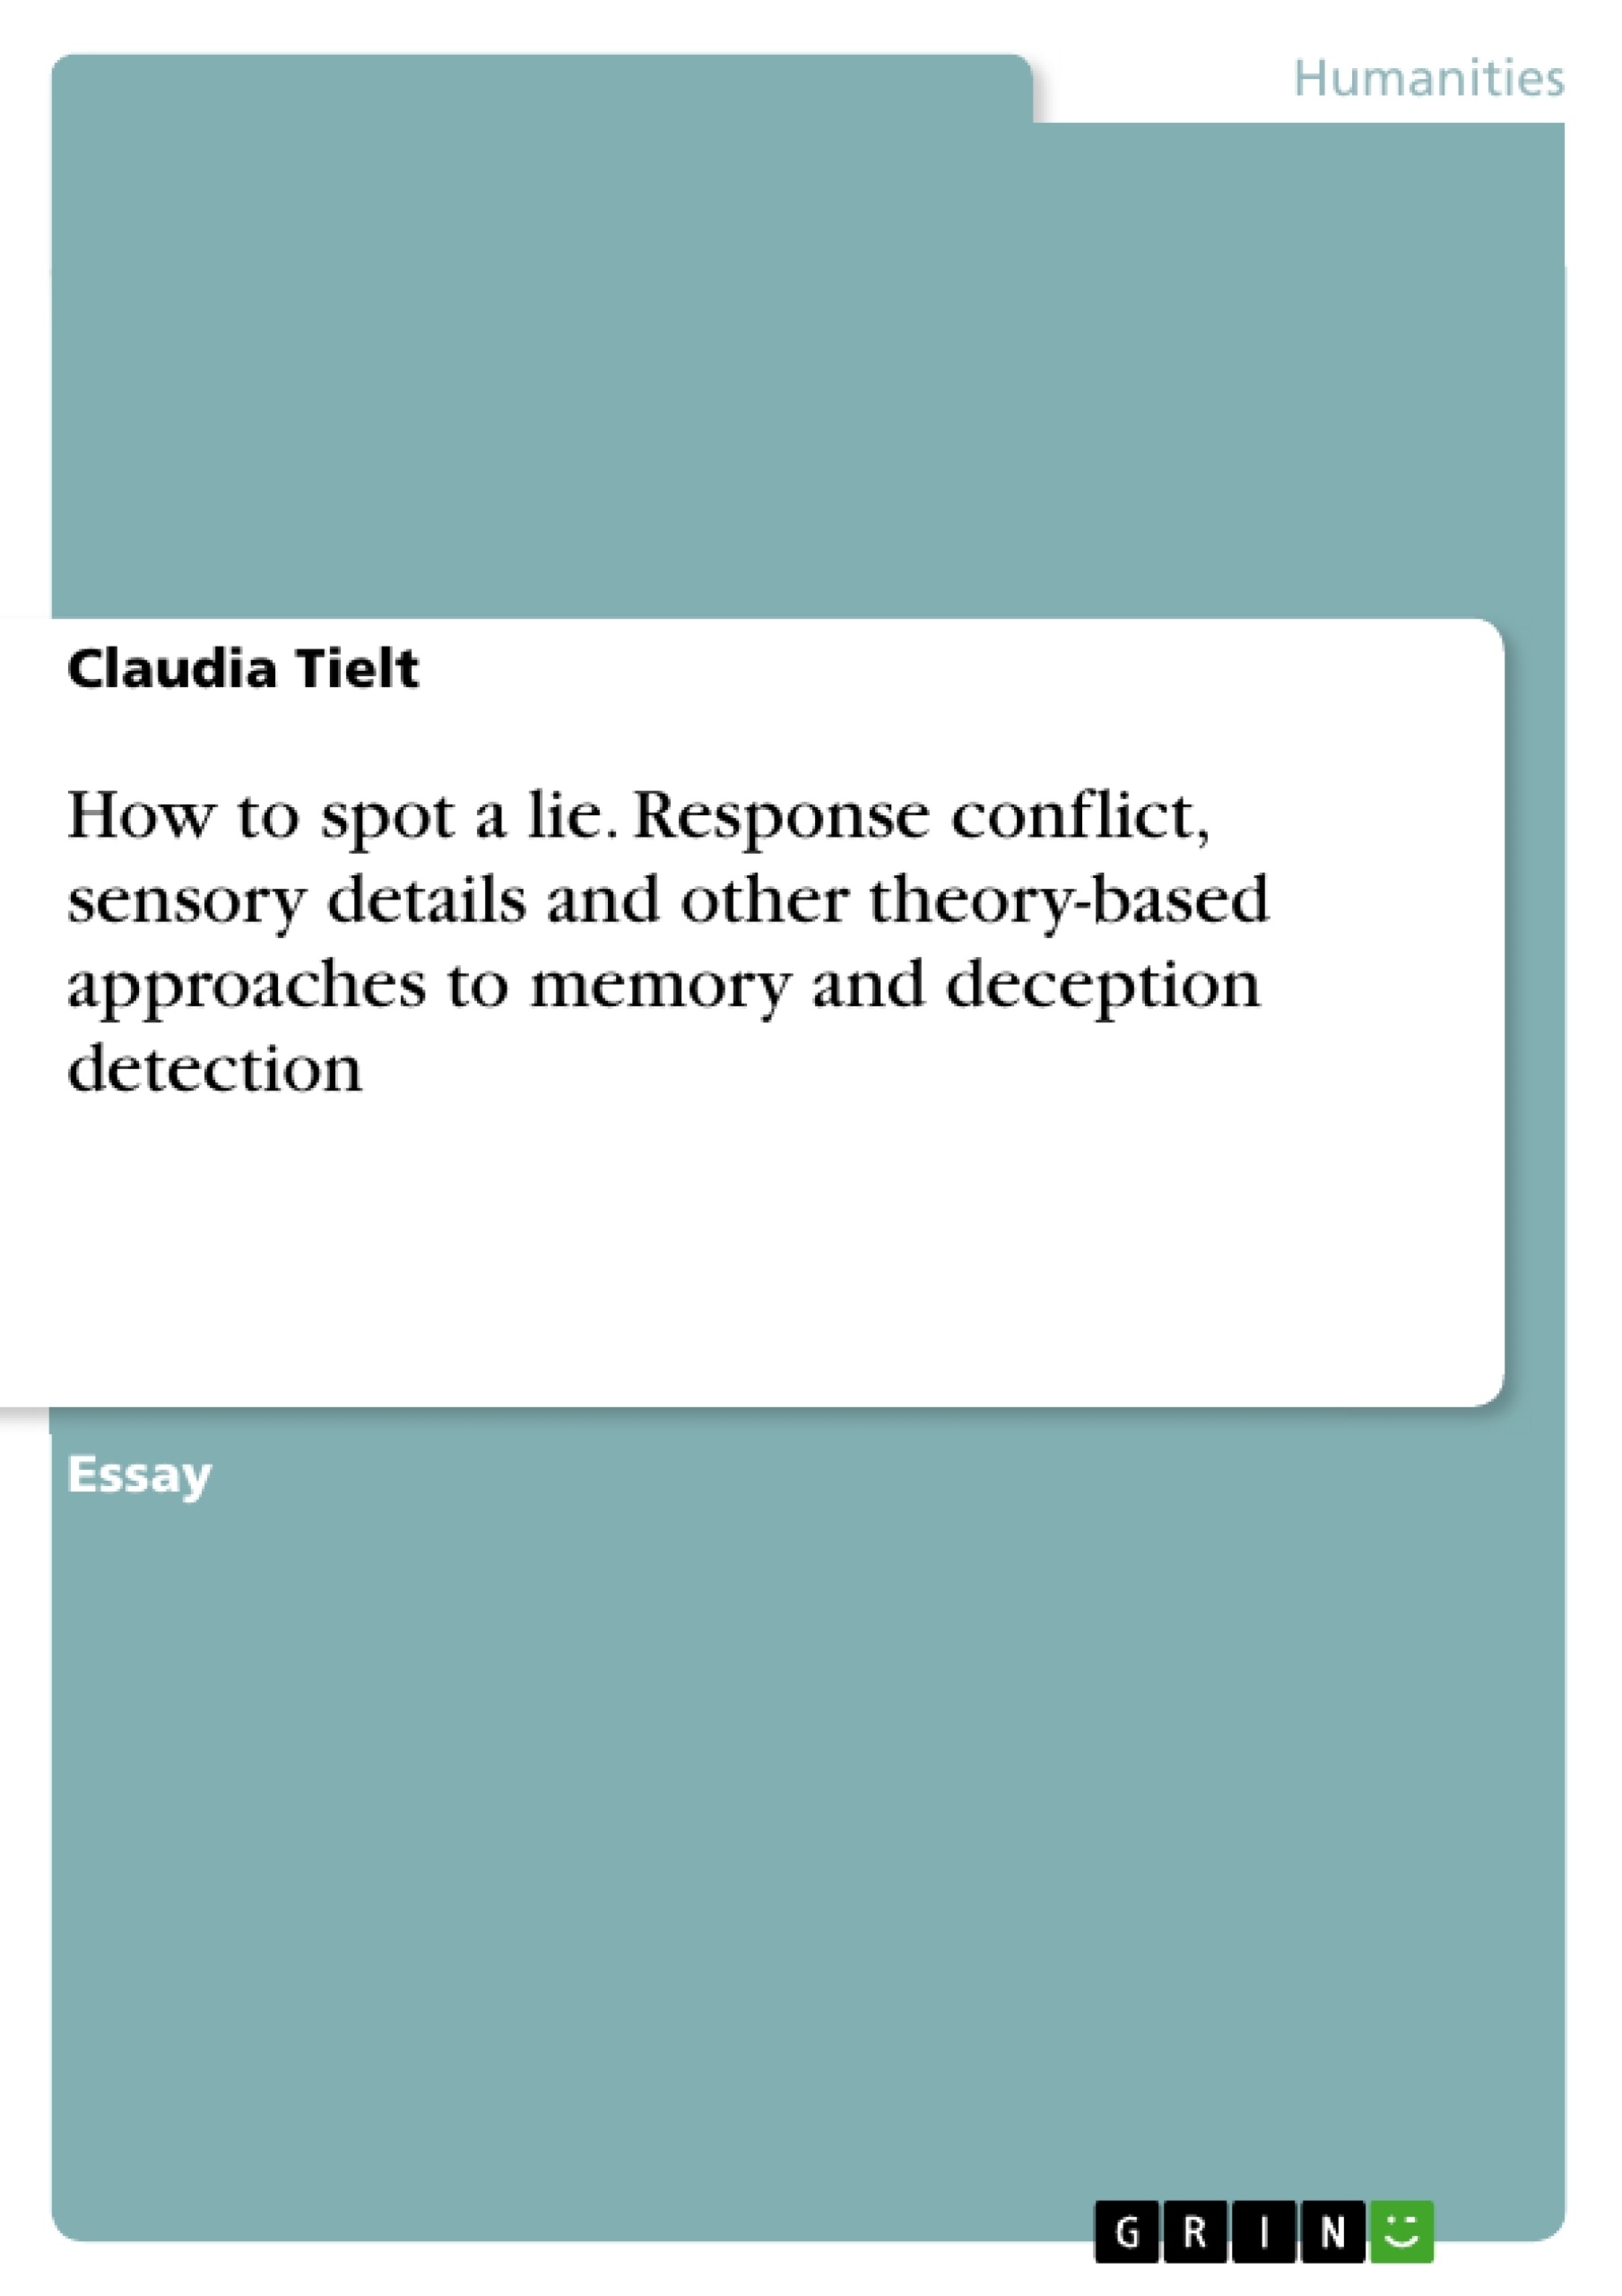 Title: How to spot a lie. Response conflict, sensory details and other theory-based approaches to memory and deception detection